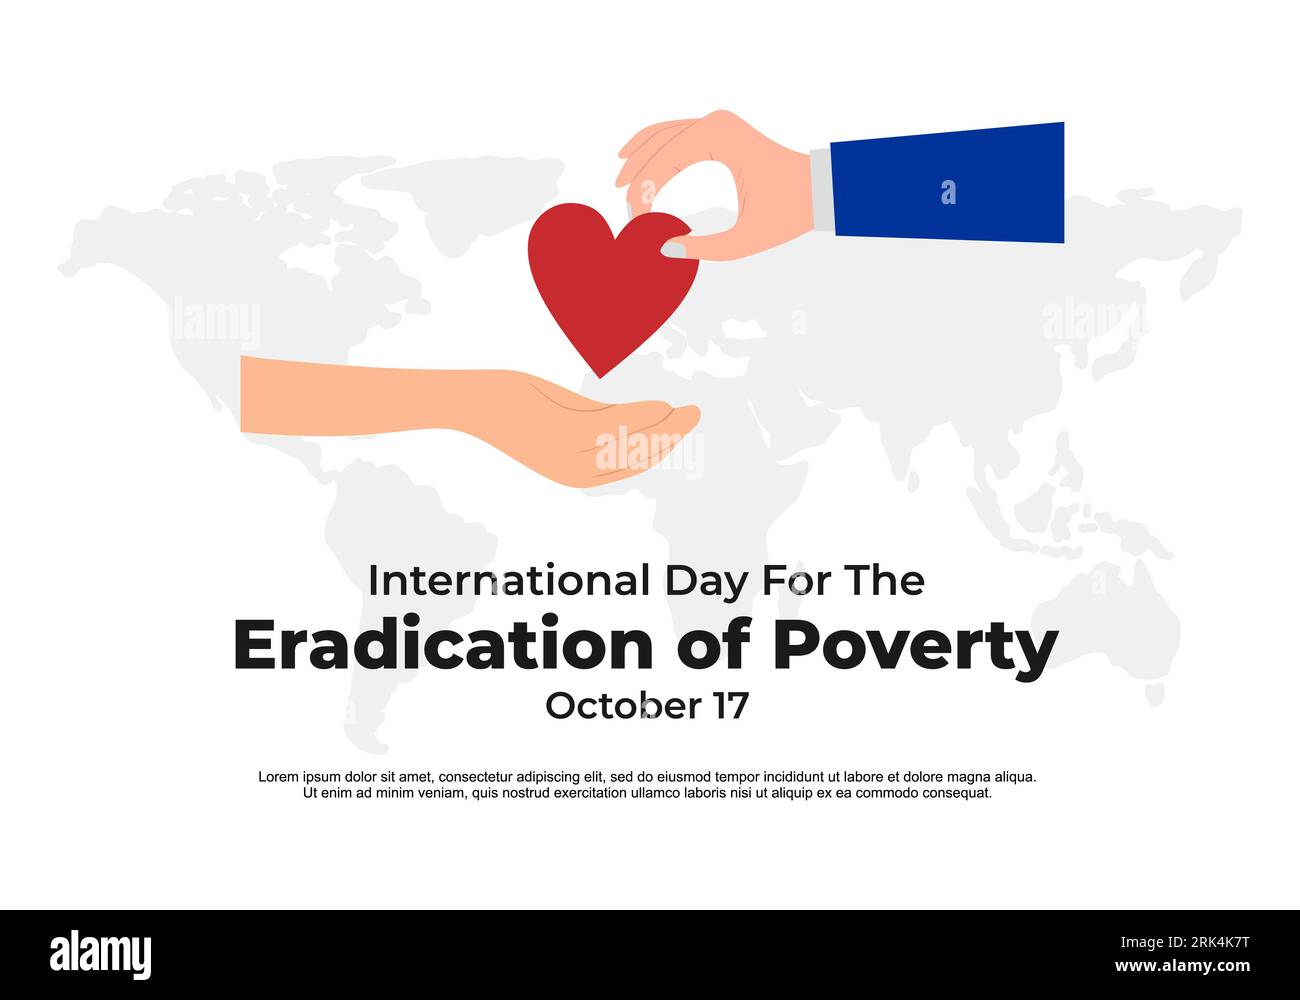 International day for the Eradication of Poverty poster on october 17. Stock Vector